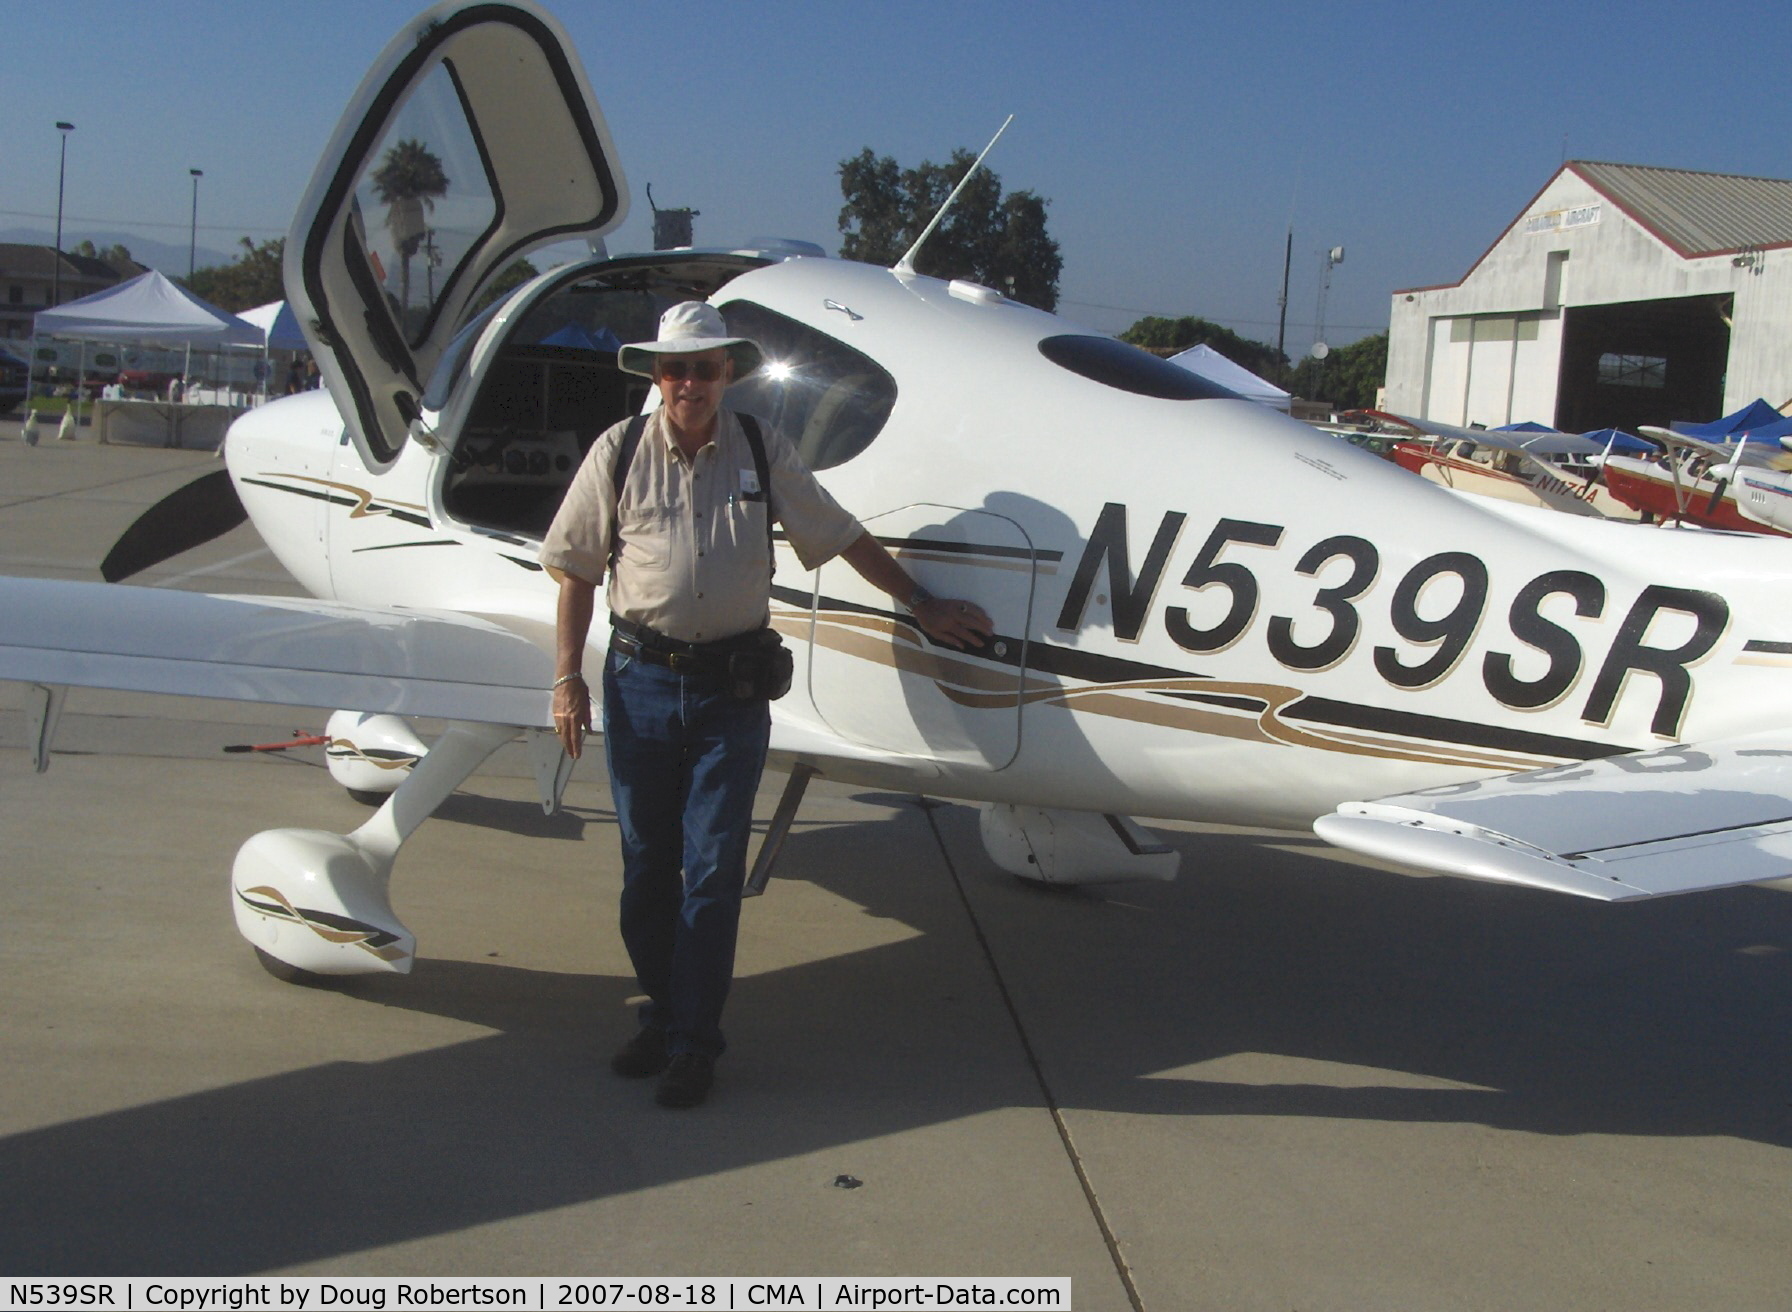 N539SR, 2007 Cirrus SR22 C/N 2543, 2007 Cirrus SR22 GT Turbo 3, Continental IO-550-N 310+ Hp, turbonormalized, Ye Olde Photographer being photographed in good company